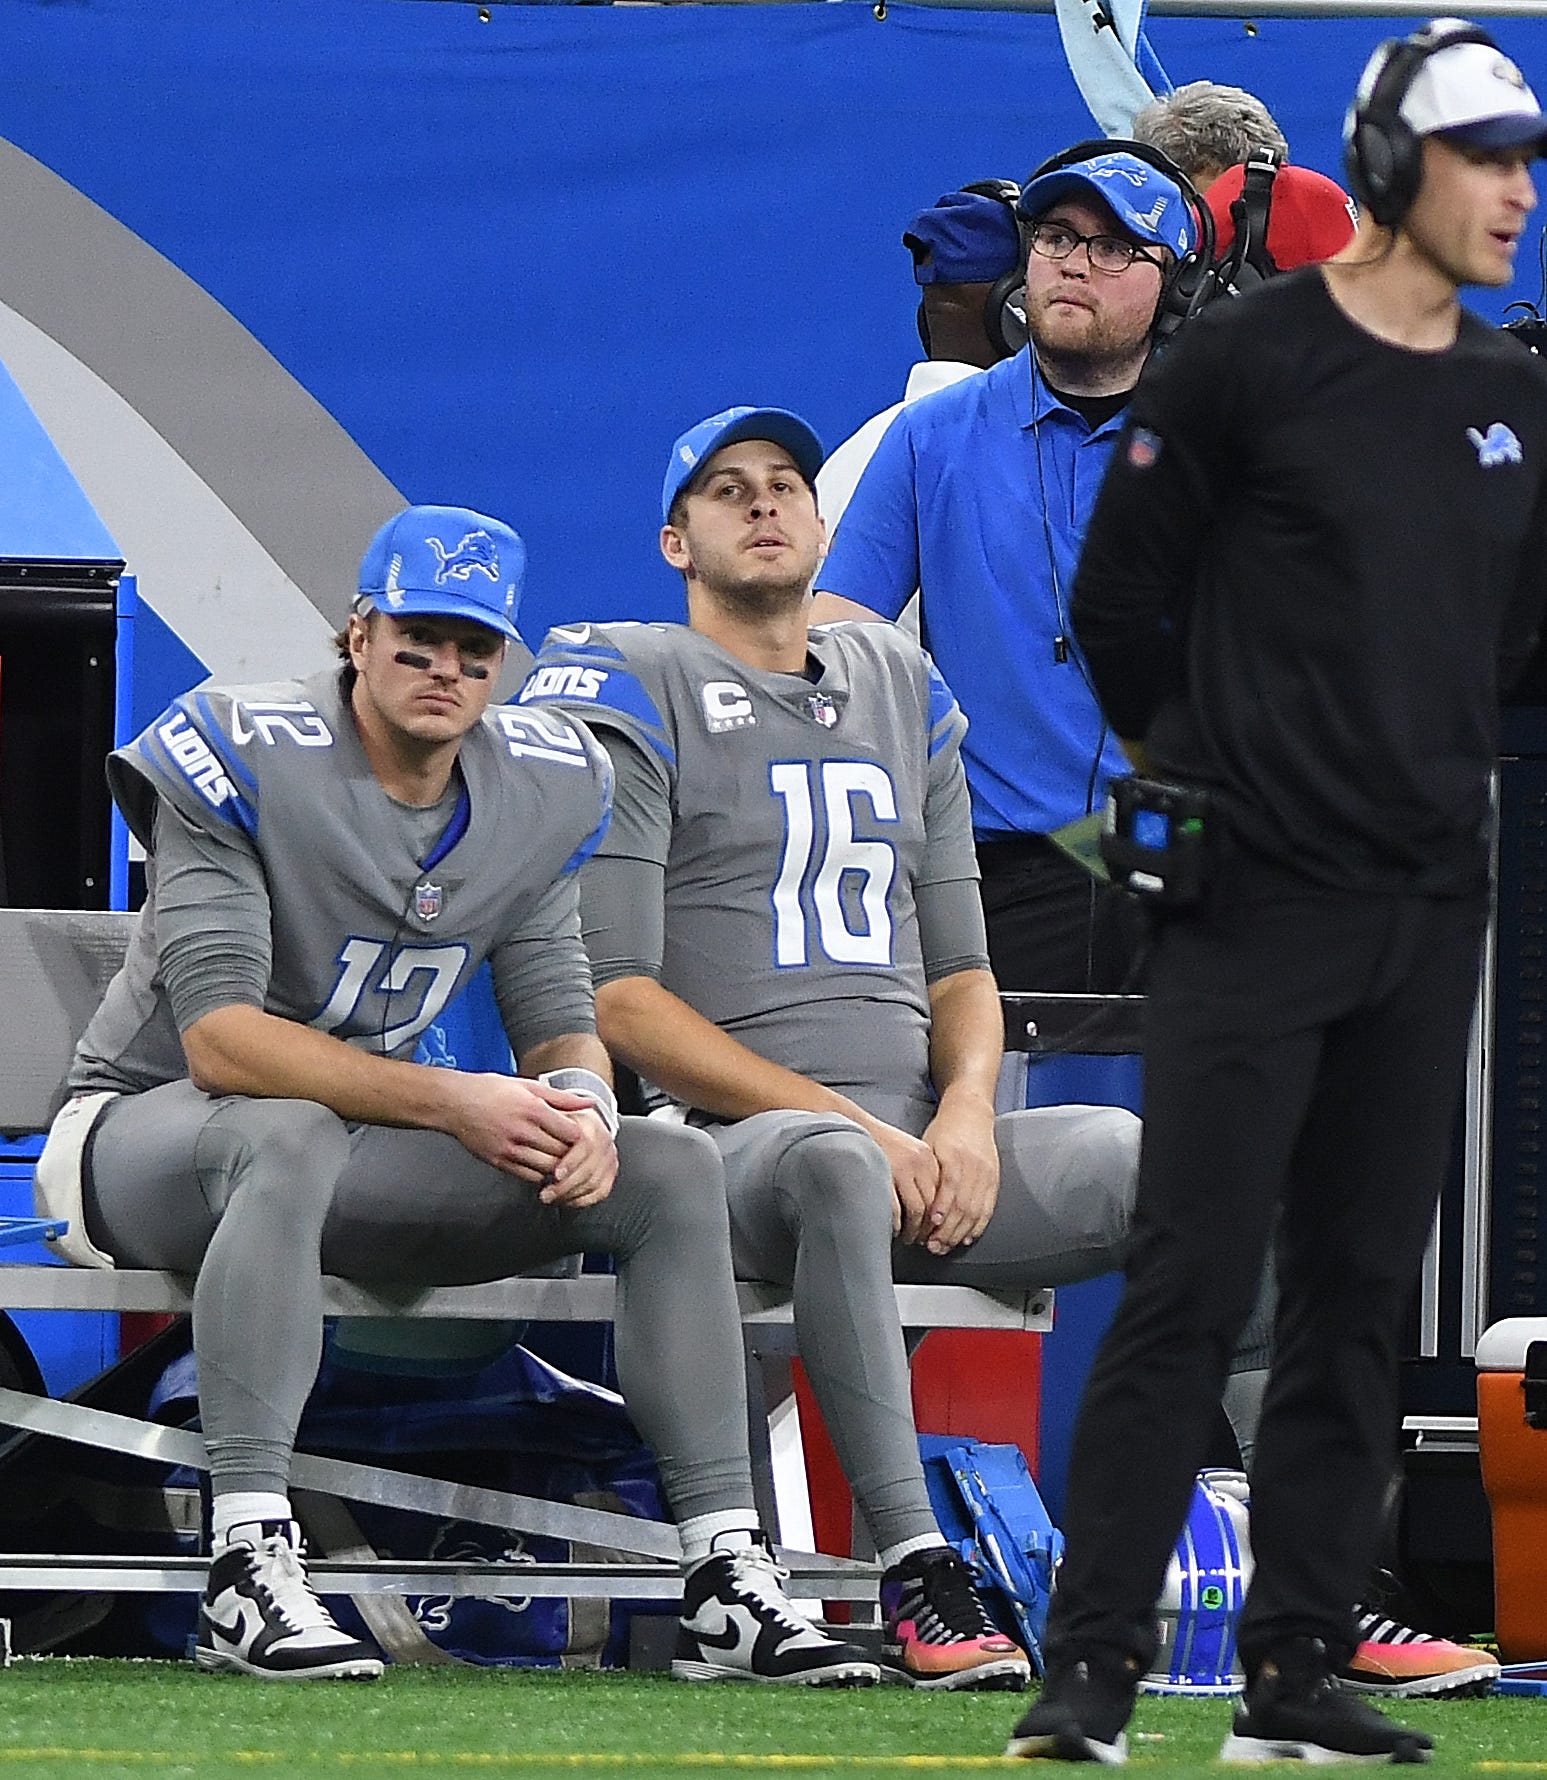 Lions' quarterbacks Tim Boyle and Jared Goff on the bench after Goff fumbled the ball in the fourth quarter.